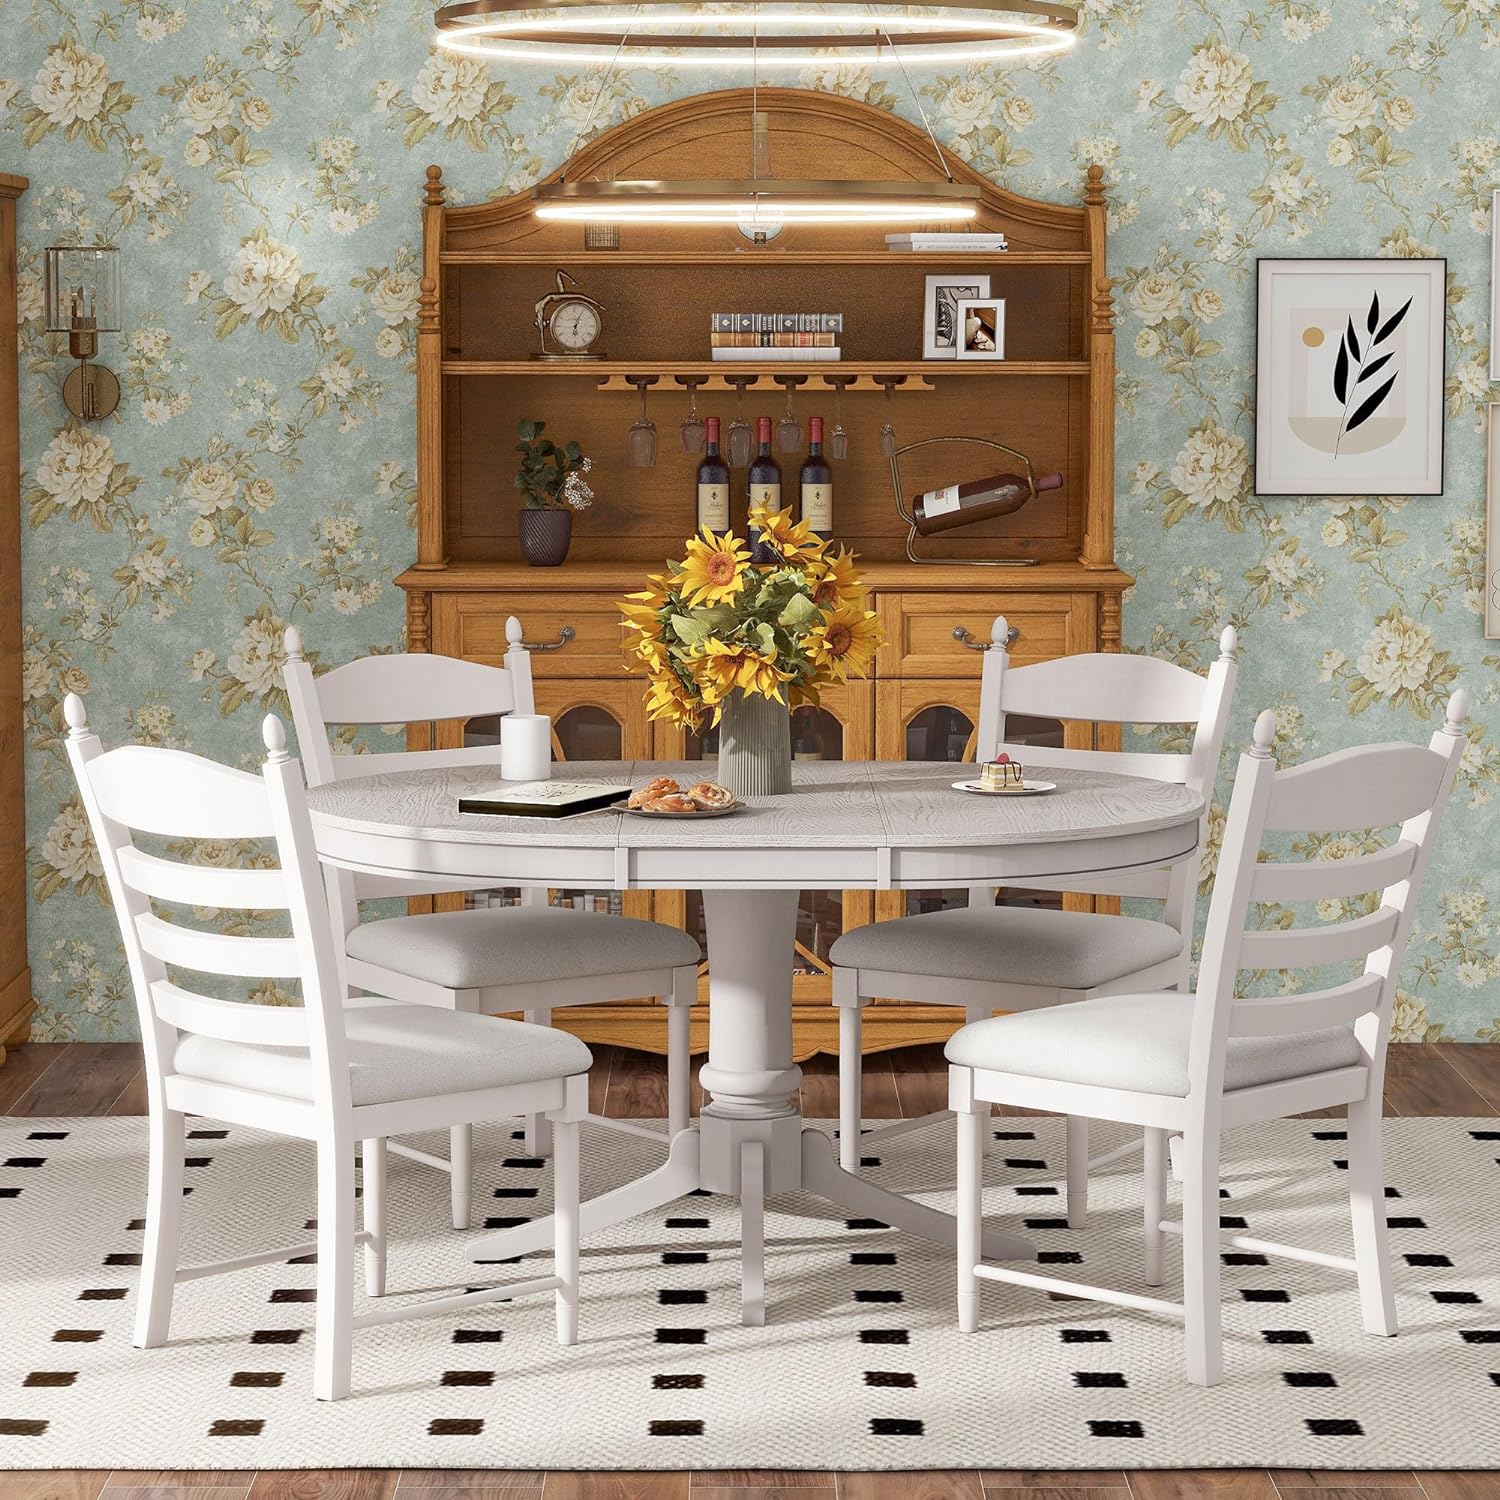 WILLIAMSPACE 5-Piece Extendable Dining Table Set, Farmhouse Wood Round Oval Dining Table with 4 Upholstered Dining Chairs, Up to 58 Kitchen Set for Dining Room Living Room (Antique White)